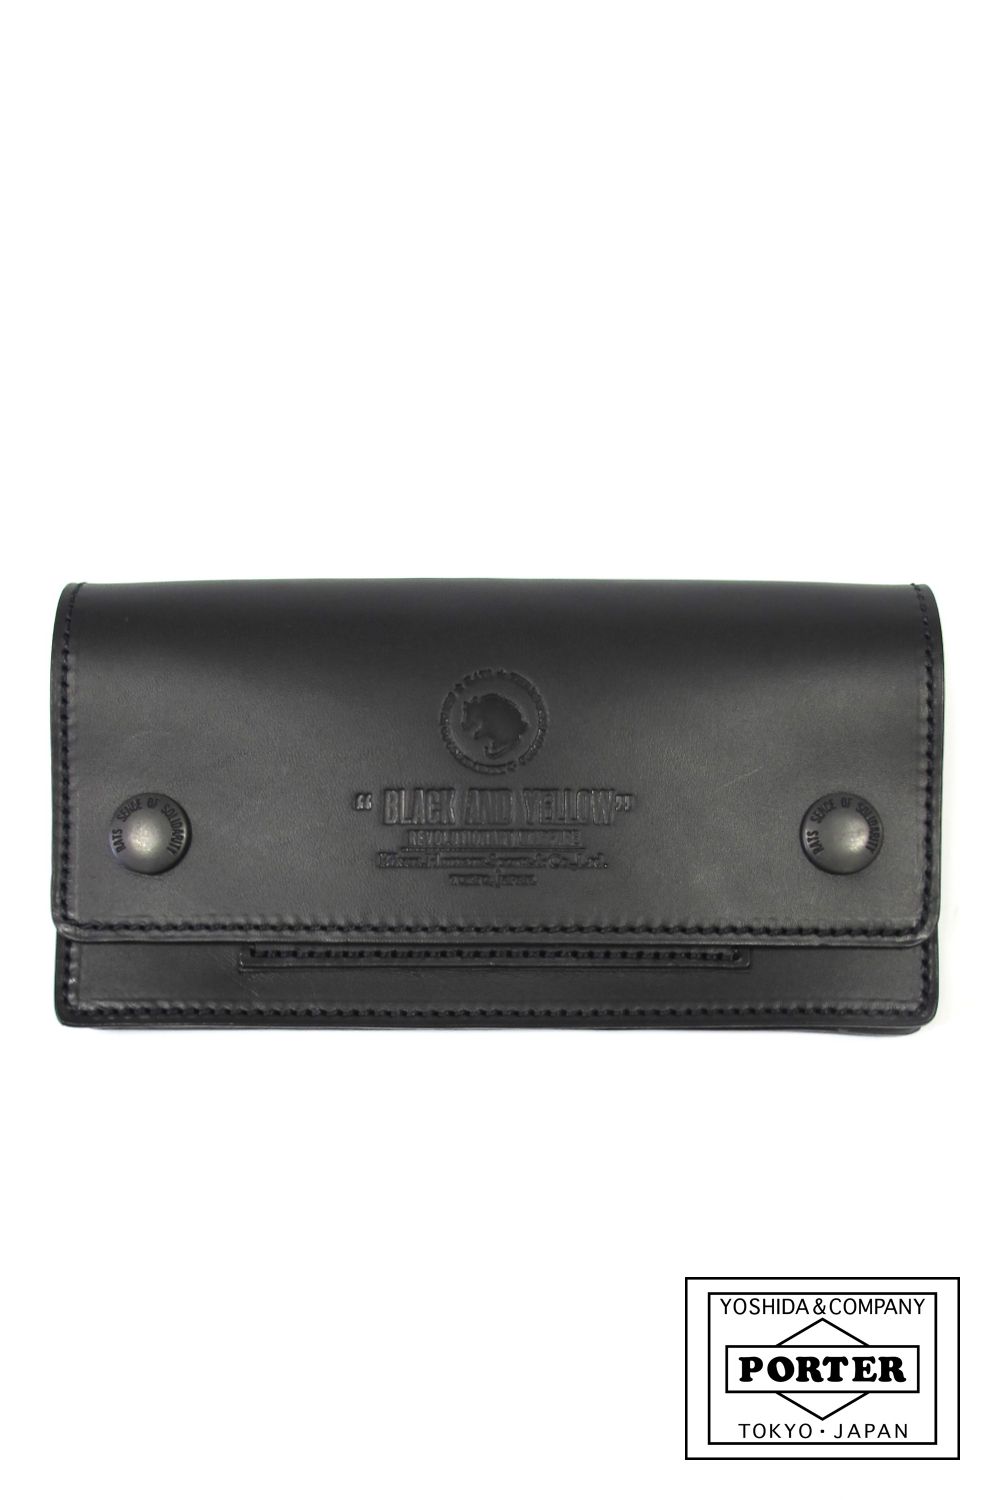 RATS - SHORT LEATHER WALLET (BLACK) / ポーター コラボレザー